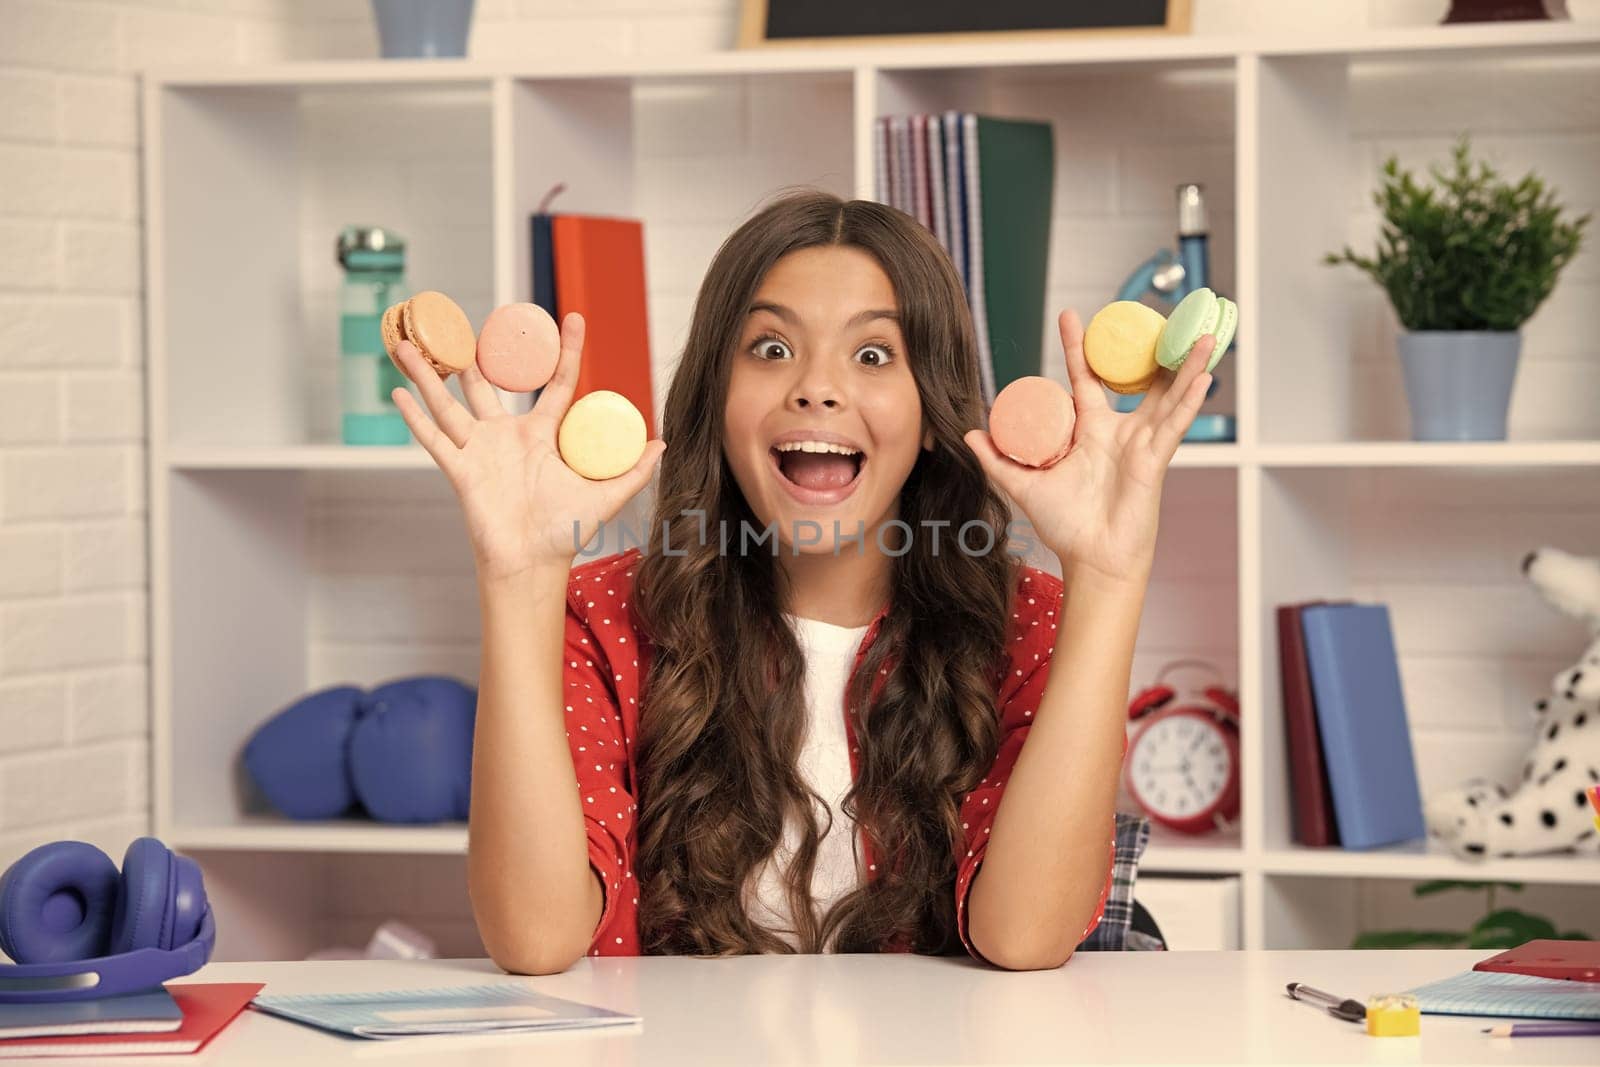 Child eat french macaron or macaroon cookies, macaroons. Excited face, cheerful emotions of teenager girl